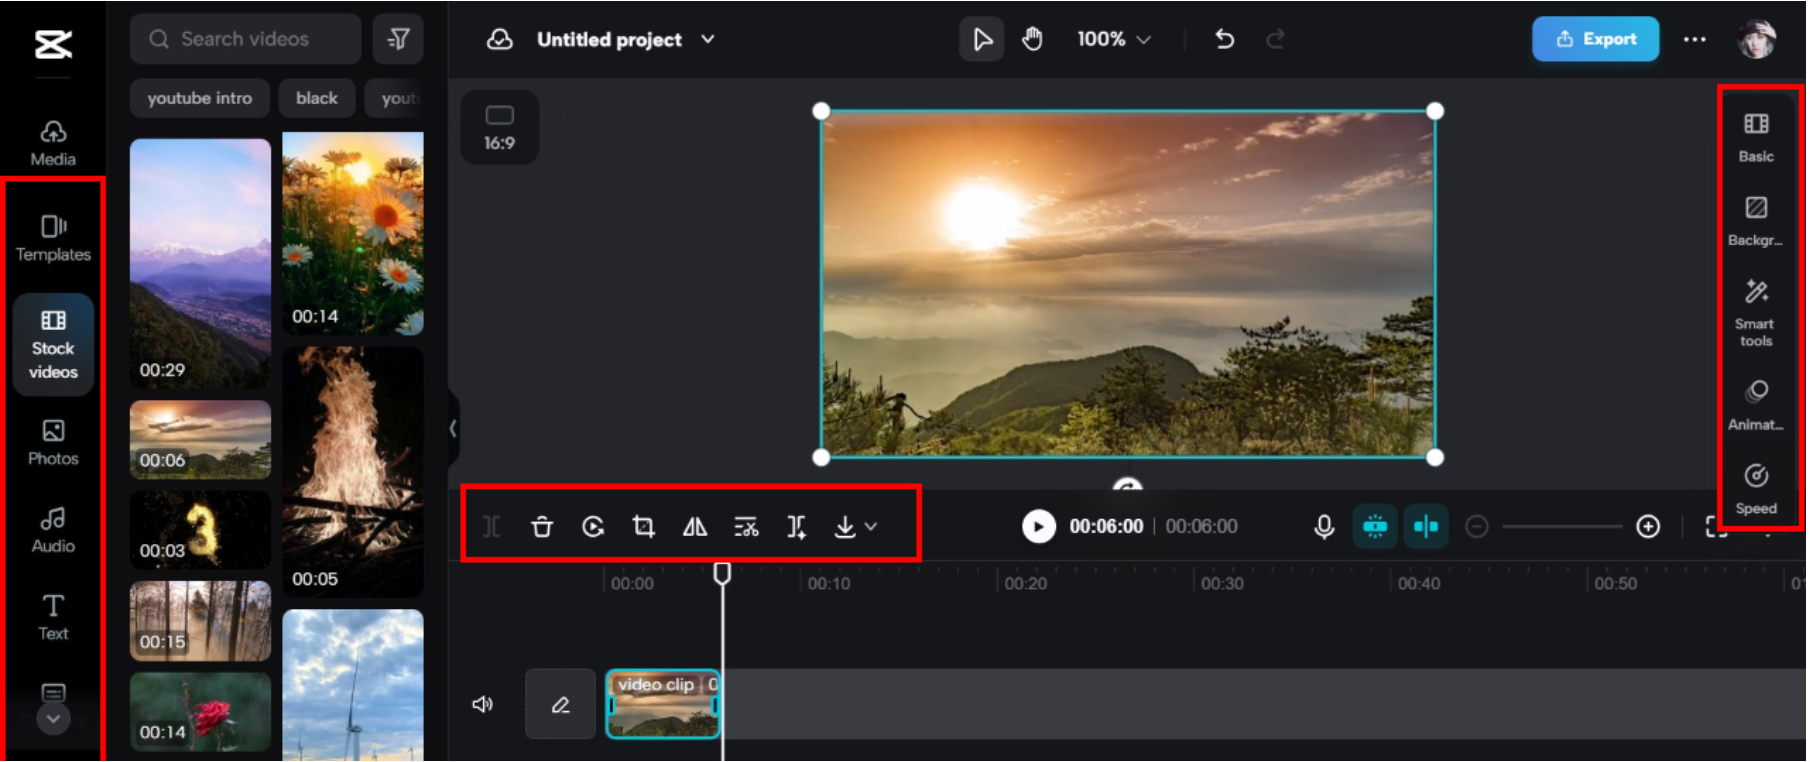 The best way to remove the YouTube watermark: CapCut online video editor